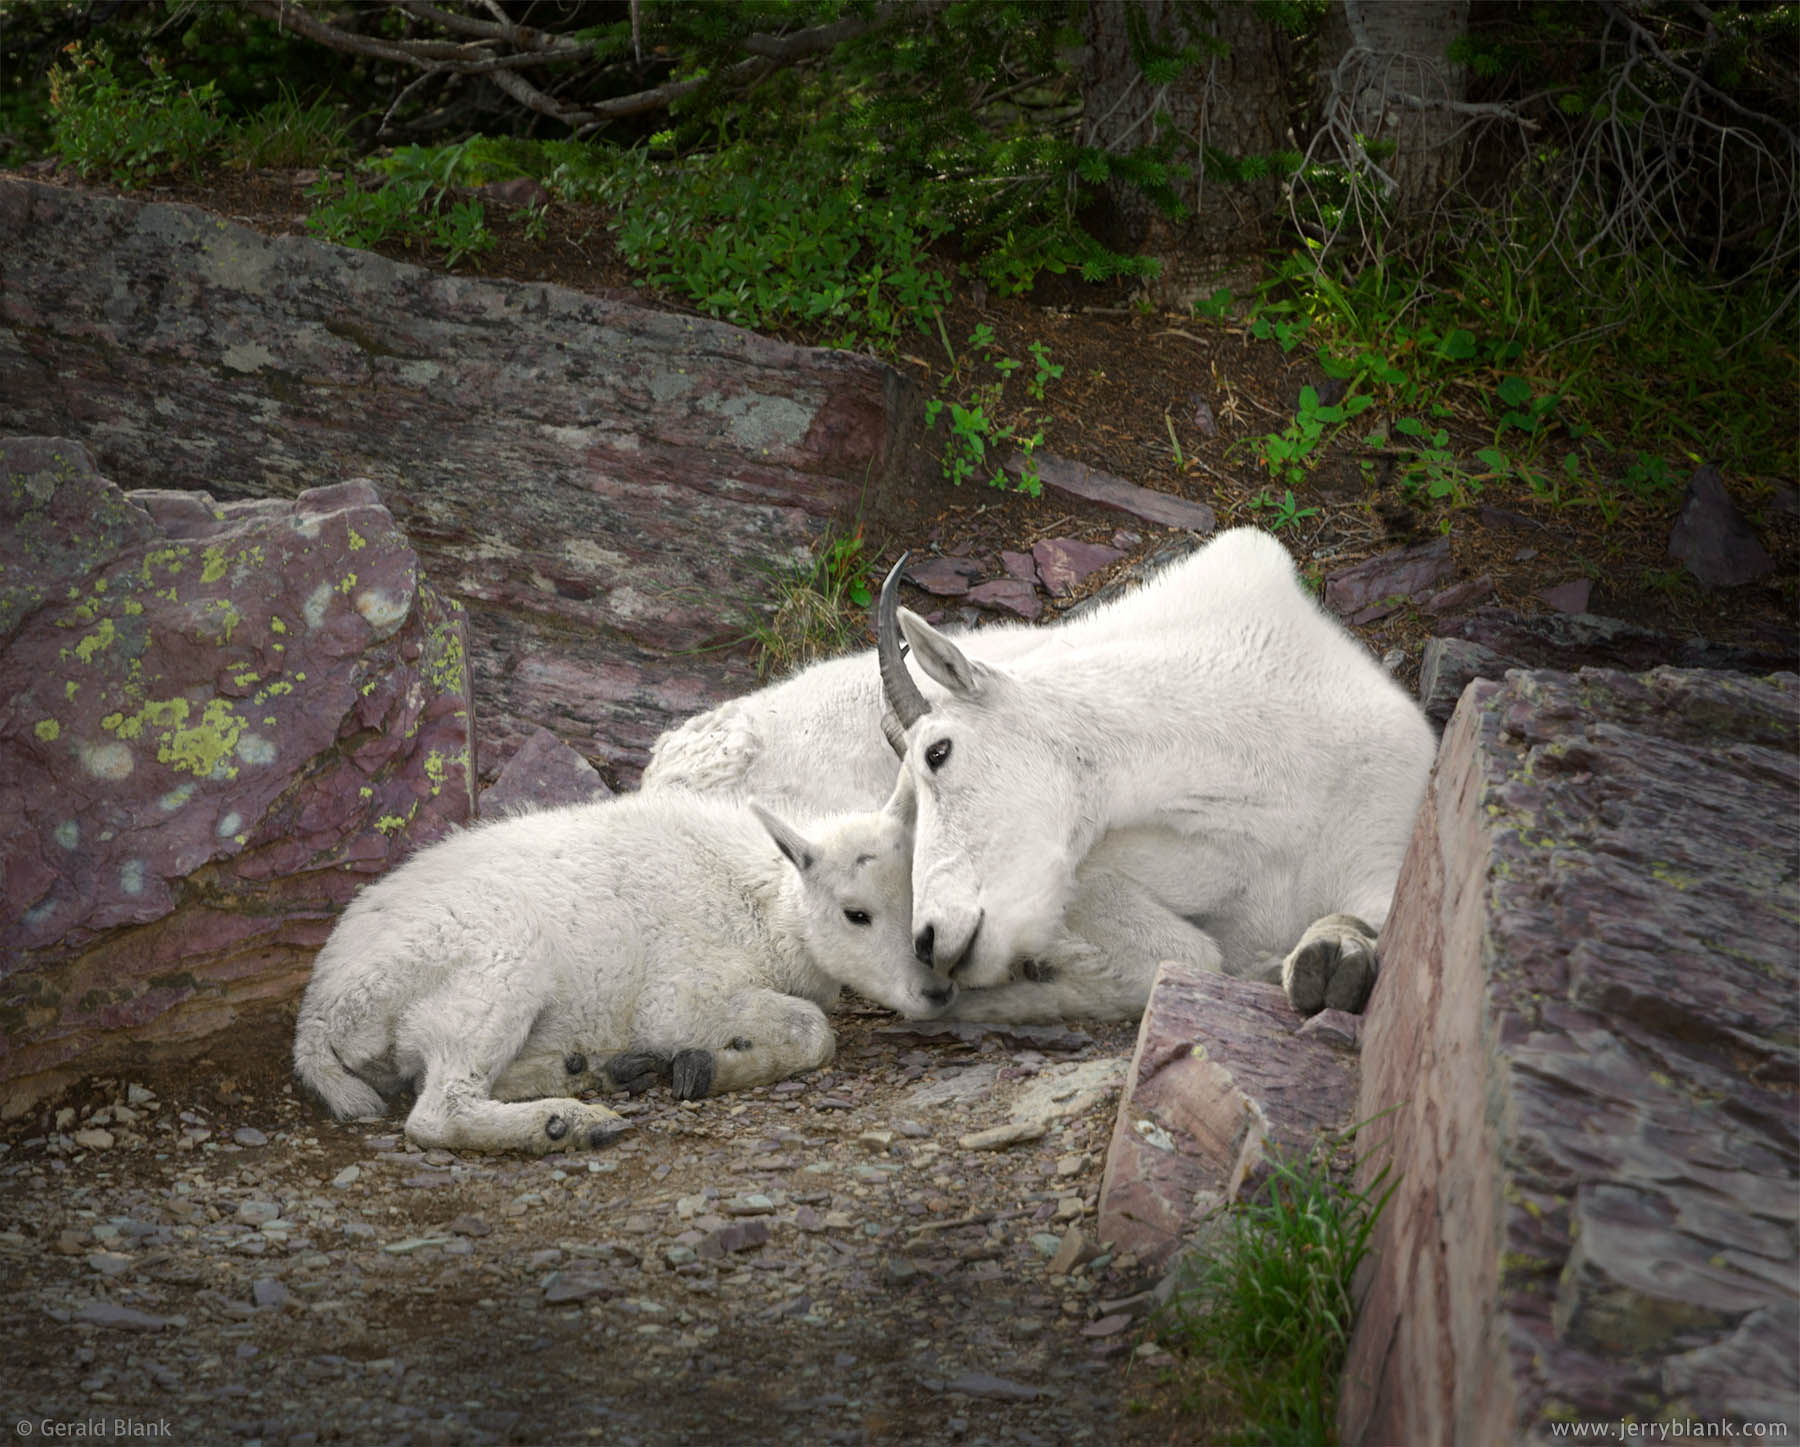 #25570 - A mountain goat kid rests with its mother in the shade on a summer afternoon, in Glacier National Park, Montana - photo by Jerry Blank